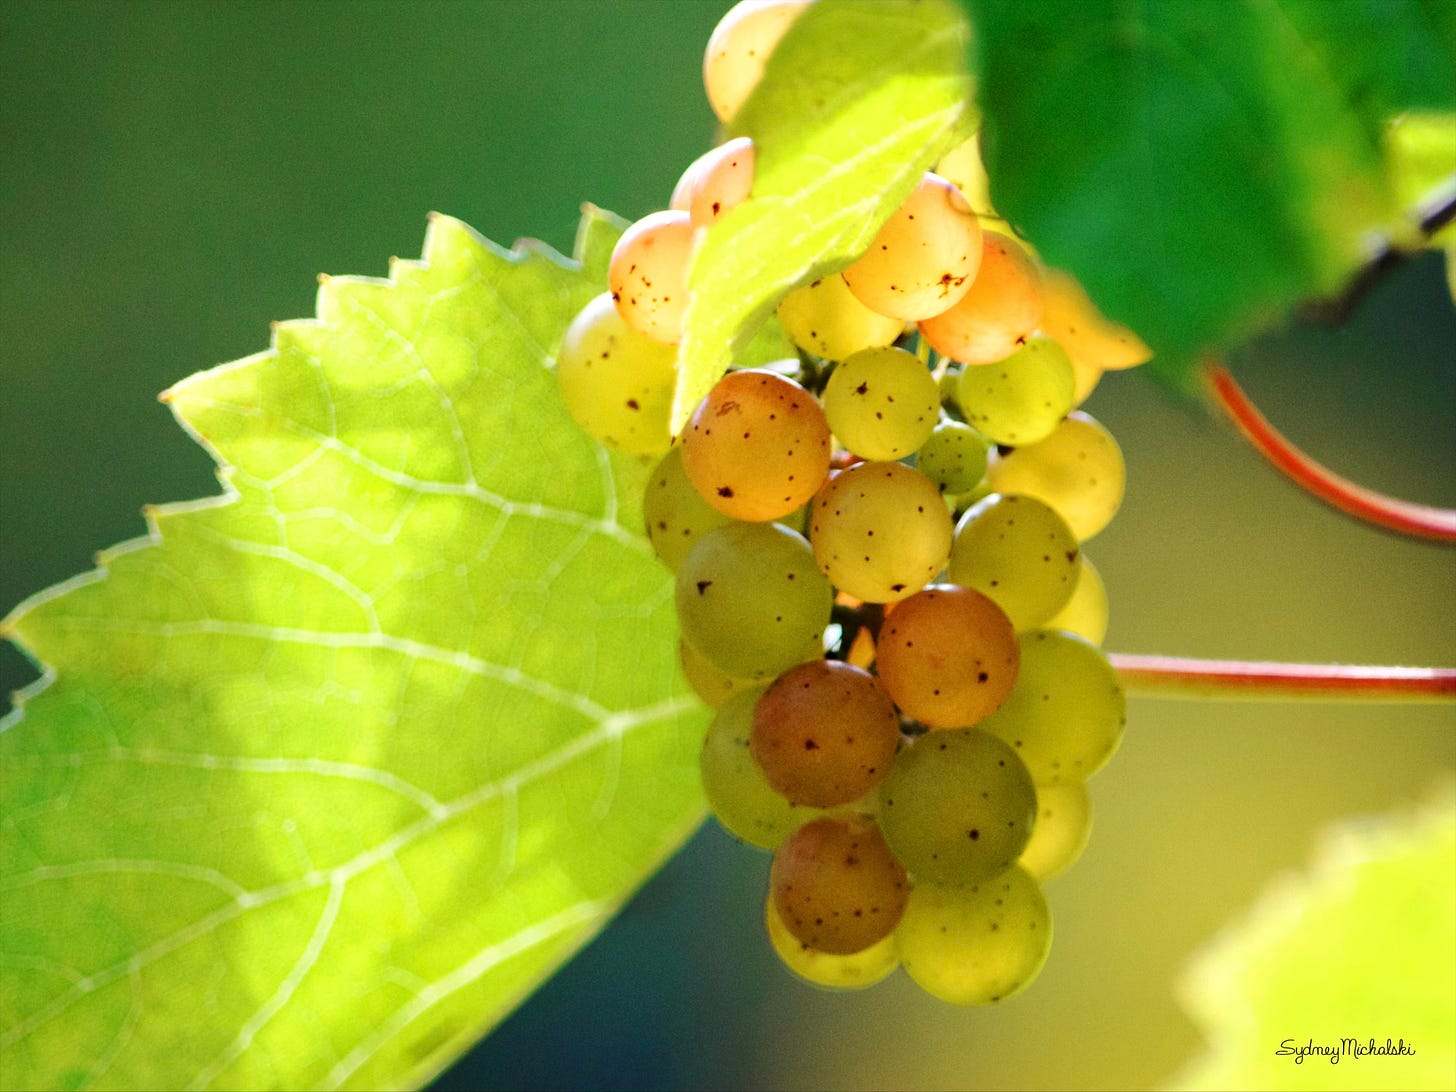 A cluster of golden ripe grapes glows on the vine.